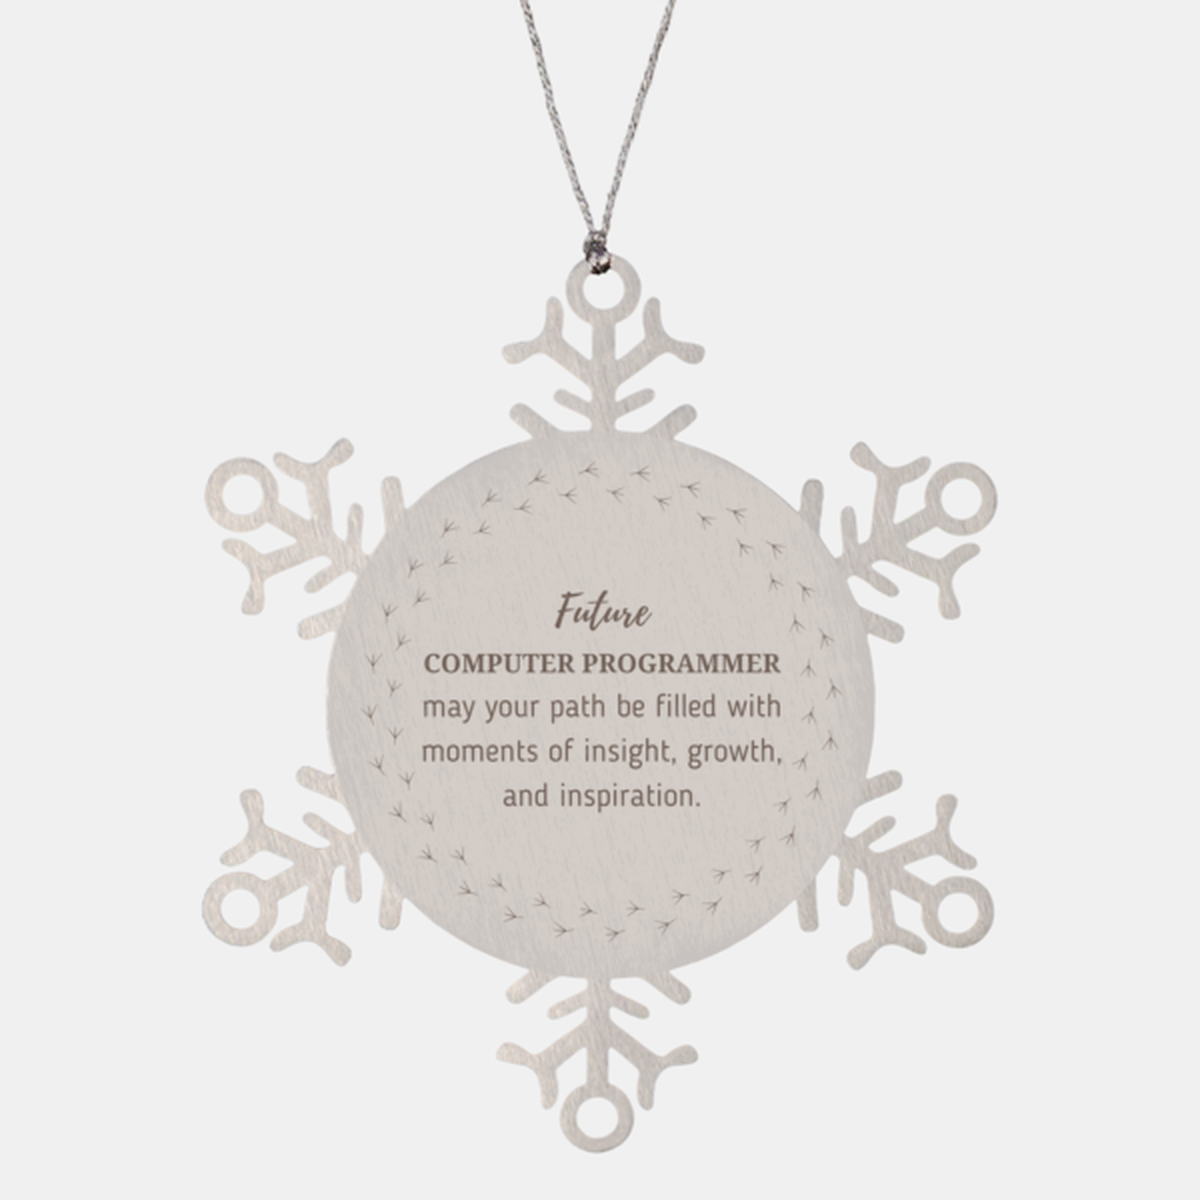 Future Computer Programmer Gifts, May your path be filled with moments of insight, Graduation Gifts for New Computer Programmer, Christmas Unique Snowflake Ornament For Men, Women, Friends